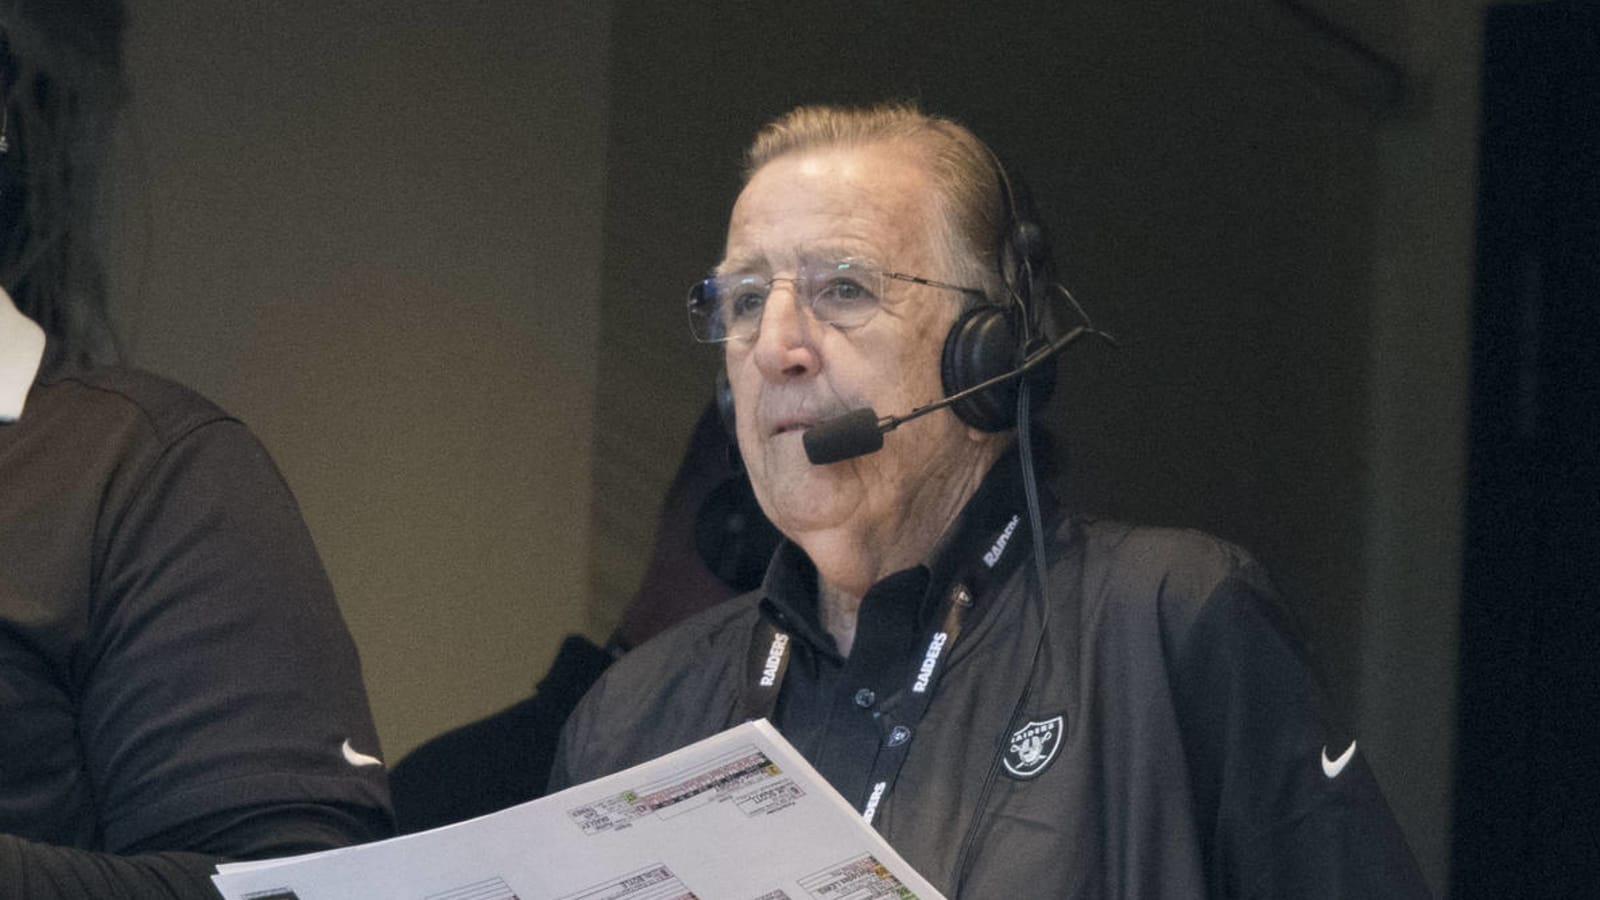 Brent Musburger shares statement on death of Irv Cross